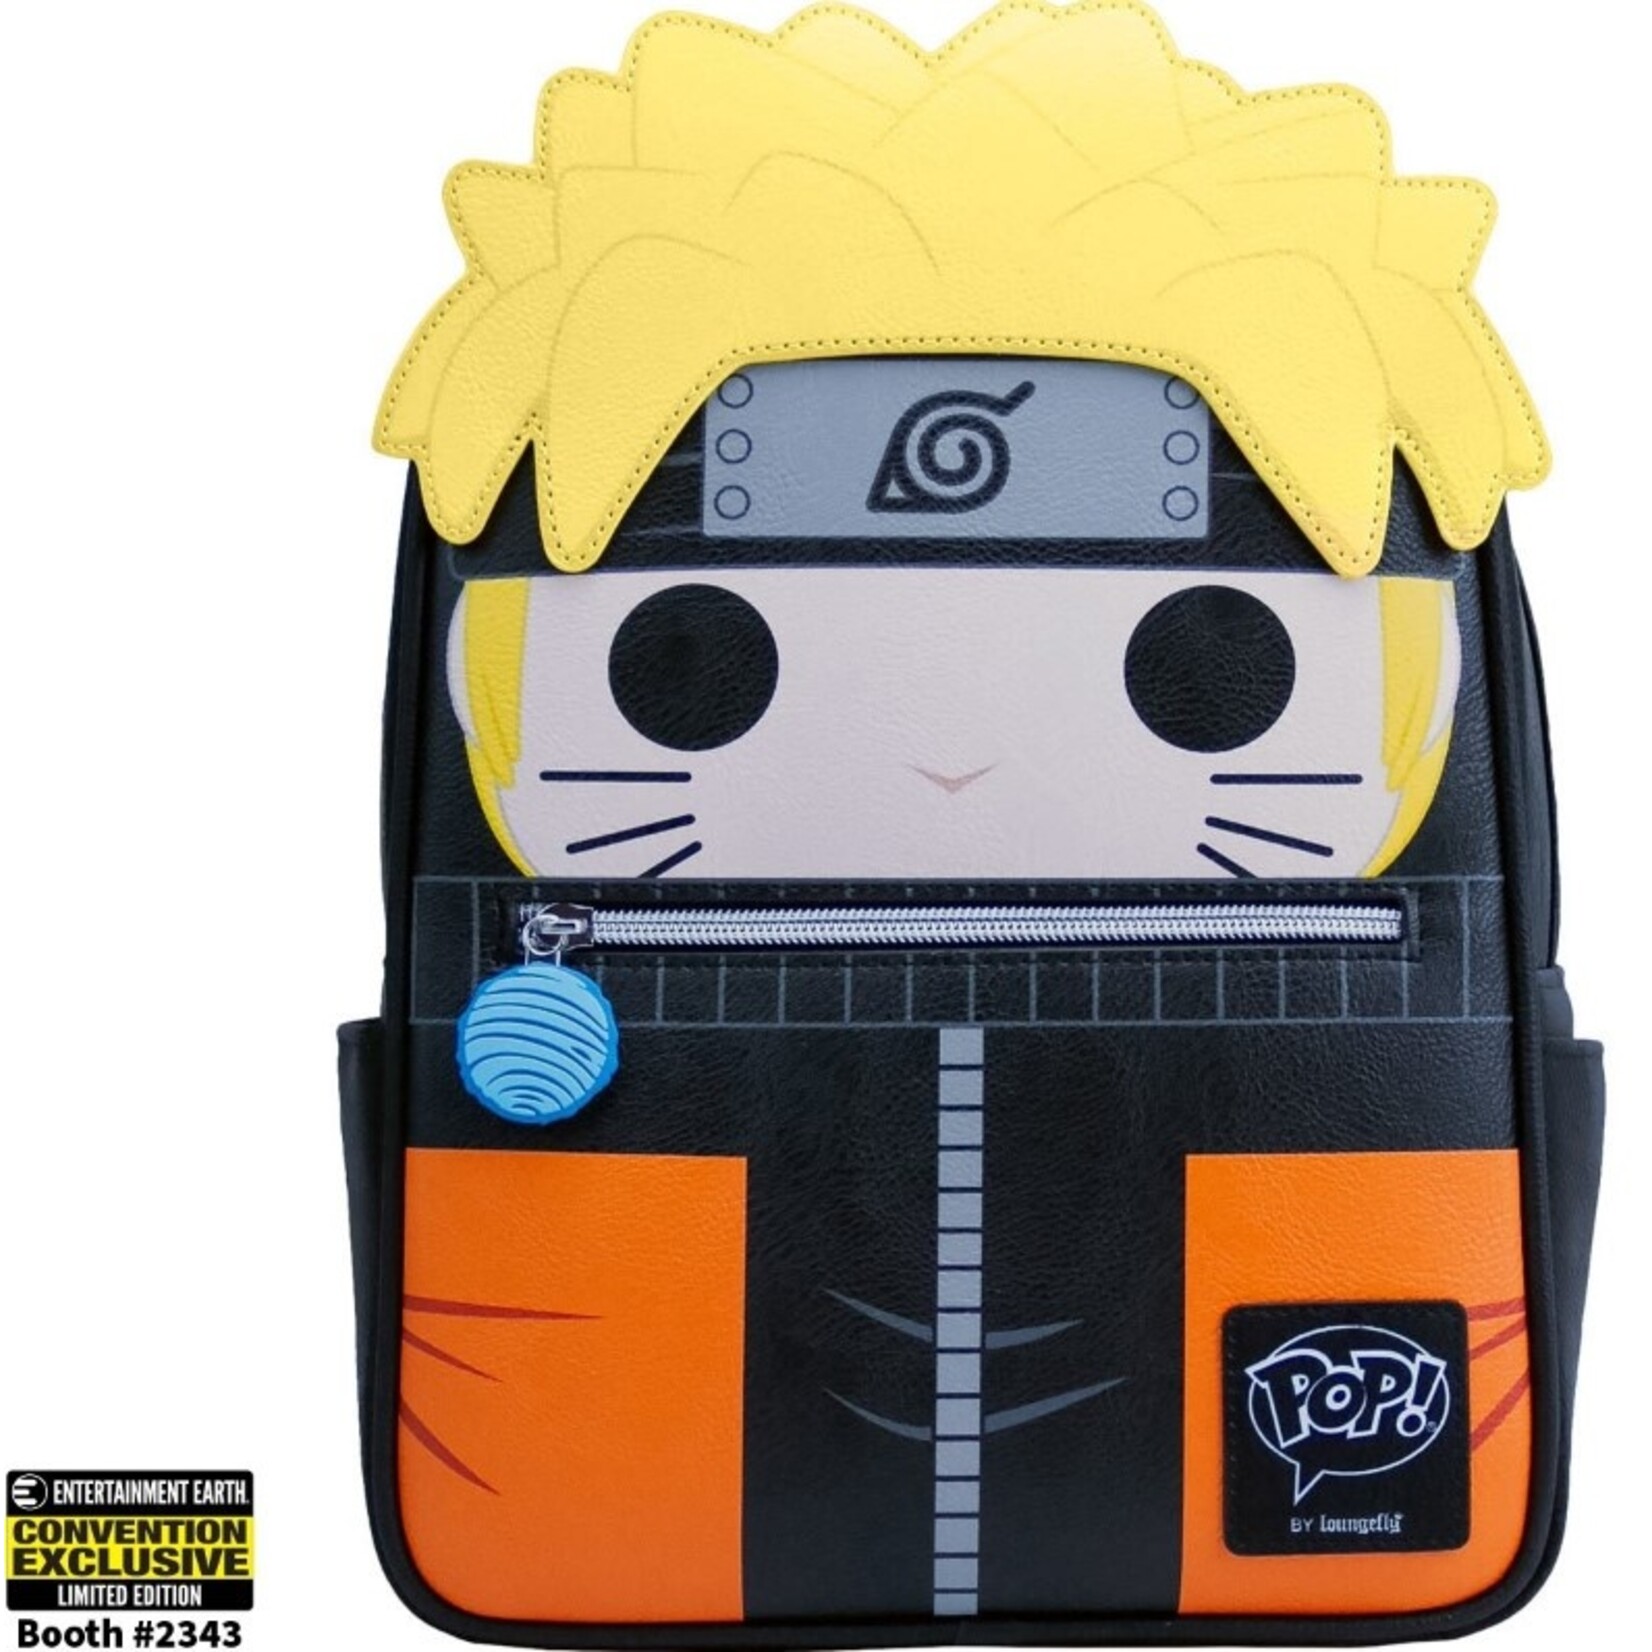 Naruto Naruto Pop! by Loungefly Mini-Backpack - Convention Excl.